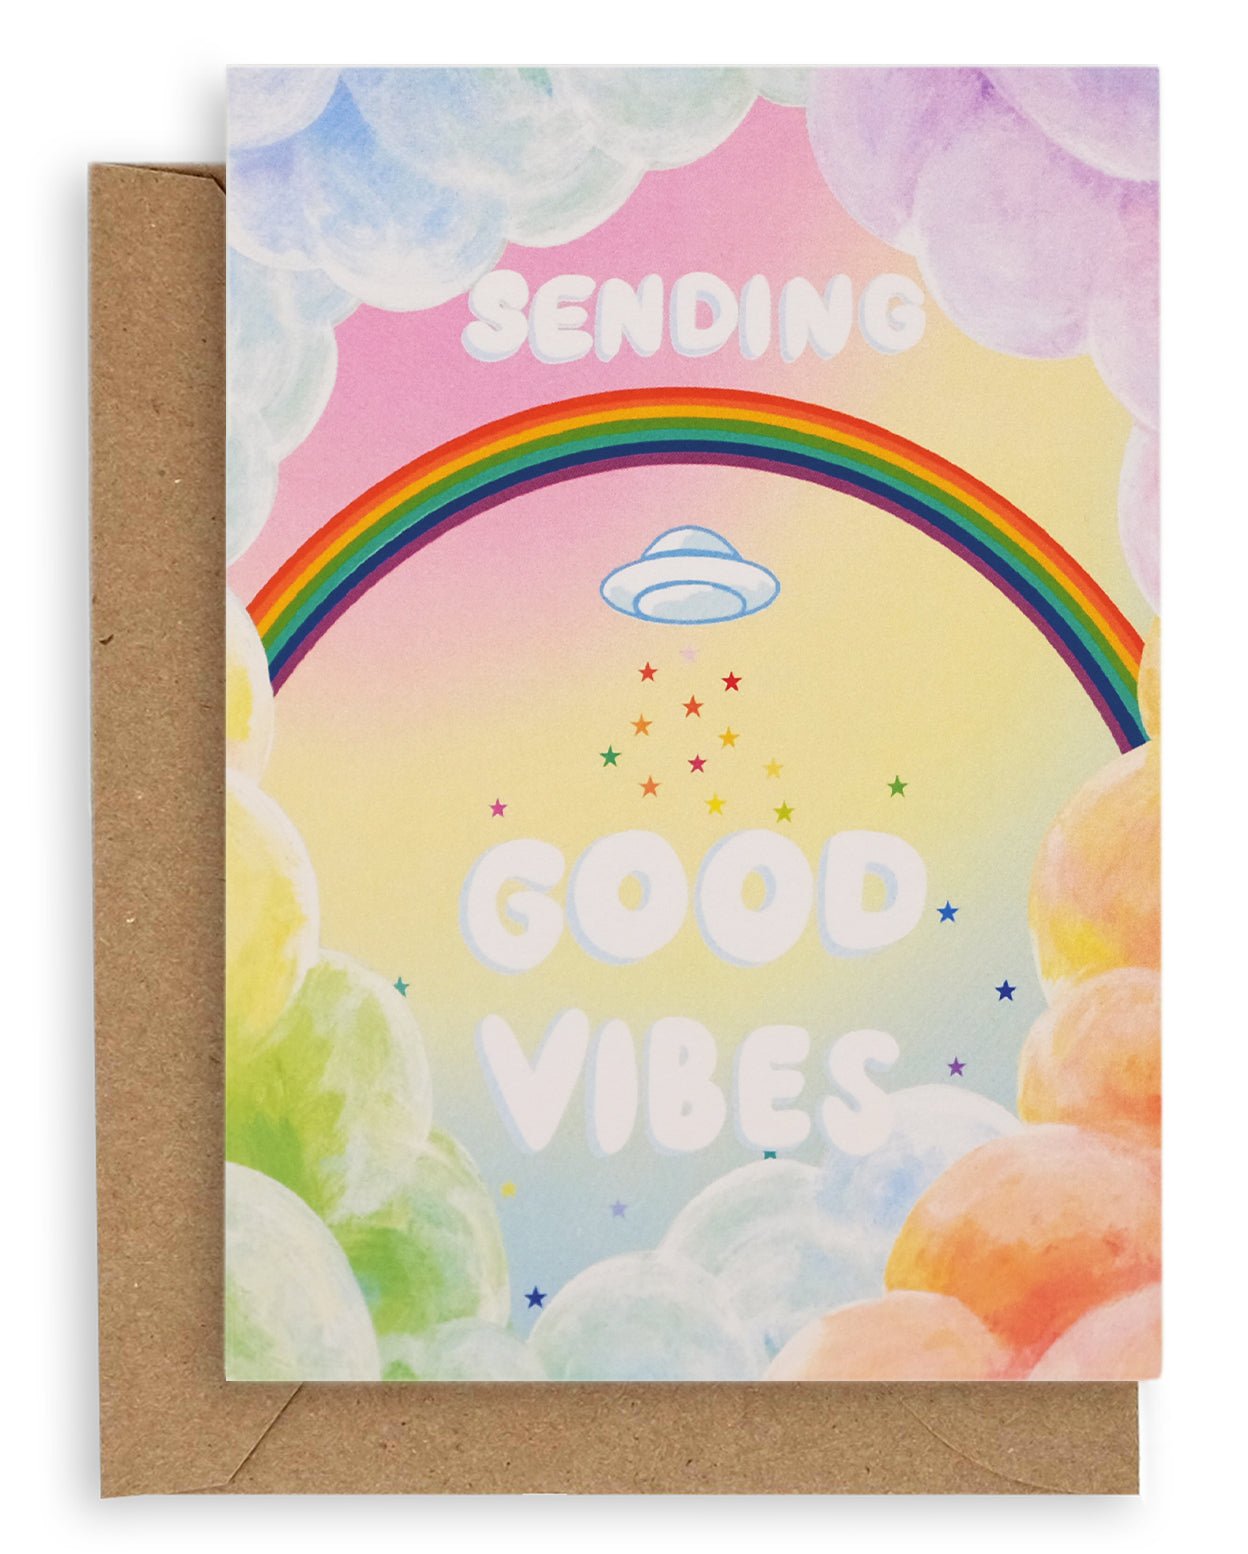 Colorful greeting card with cumulus clouds surrounding a rainbow with a UFO below it, followed by rainbow stars and clouds, and the words &quot;Sending Good Vibes&quot; on the front. Shown with a brown kraft paper envelope.